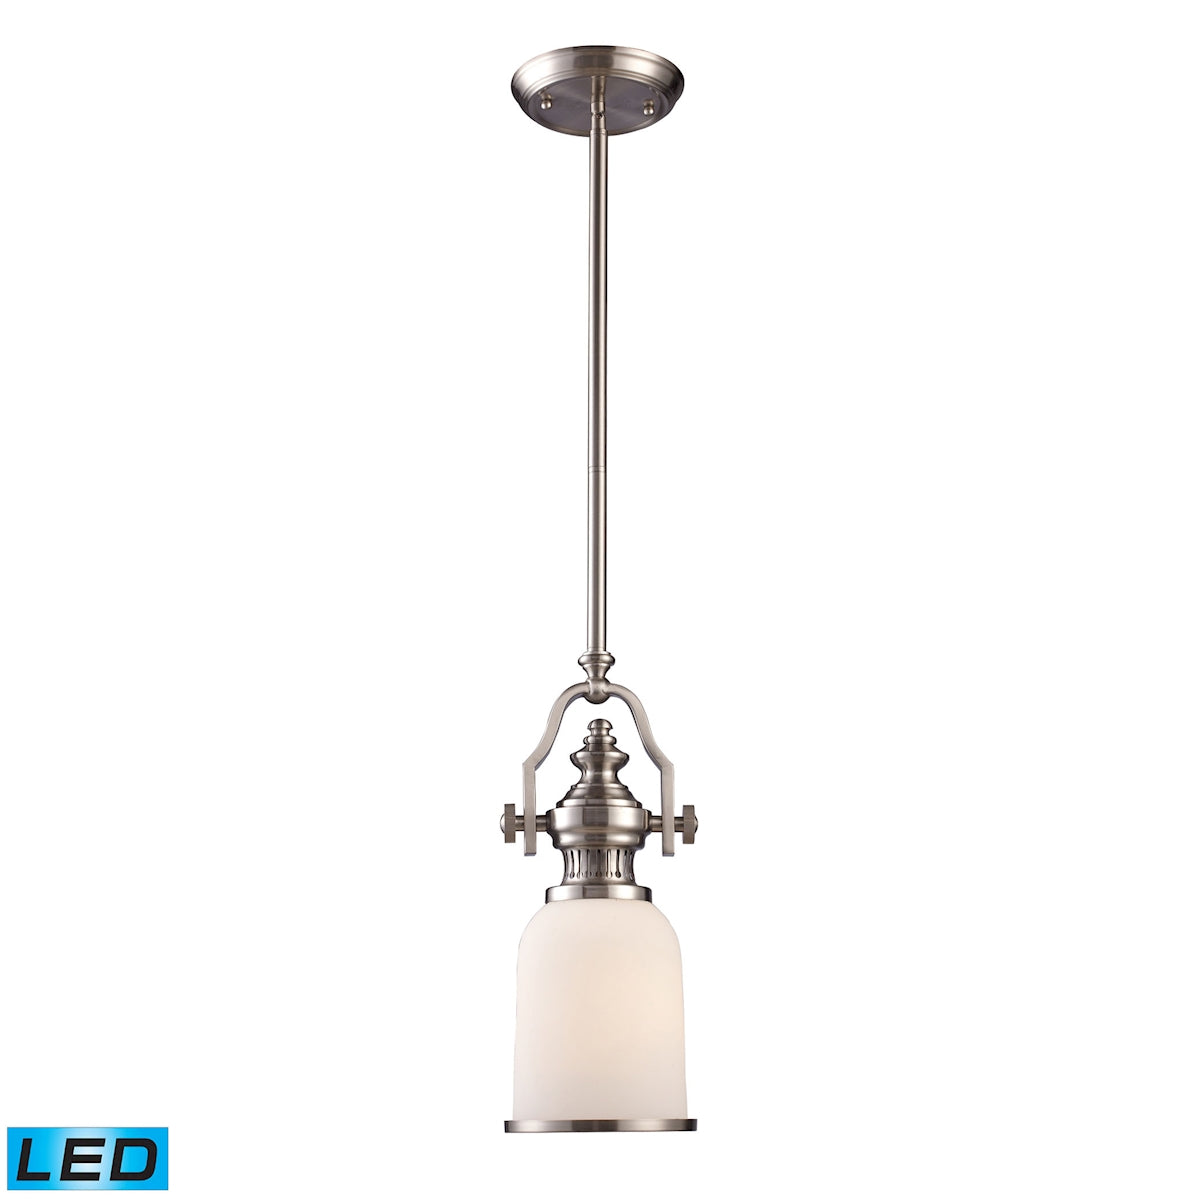 ELK Lighting 66122-1-LED Chadwick 1-Light Mini Pendant in Satin Nickel with White Glass - Includes LED Bulb